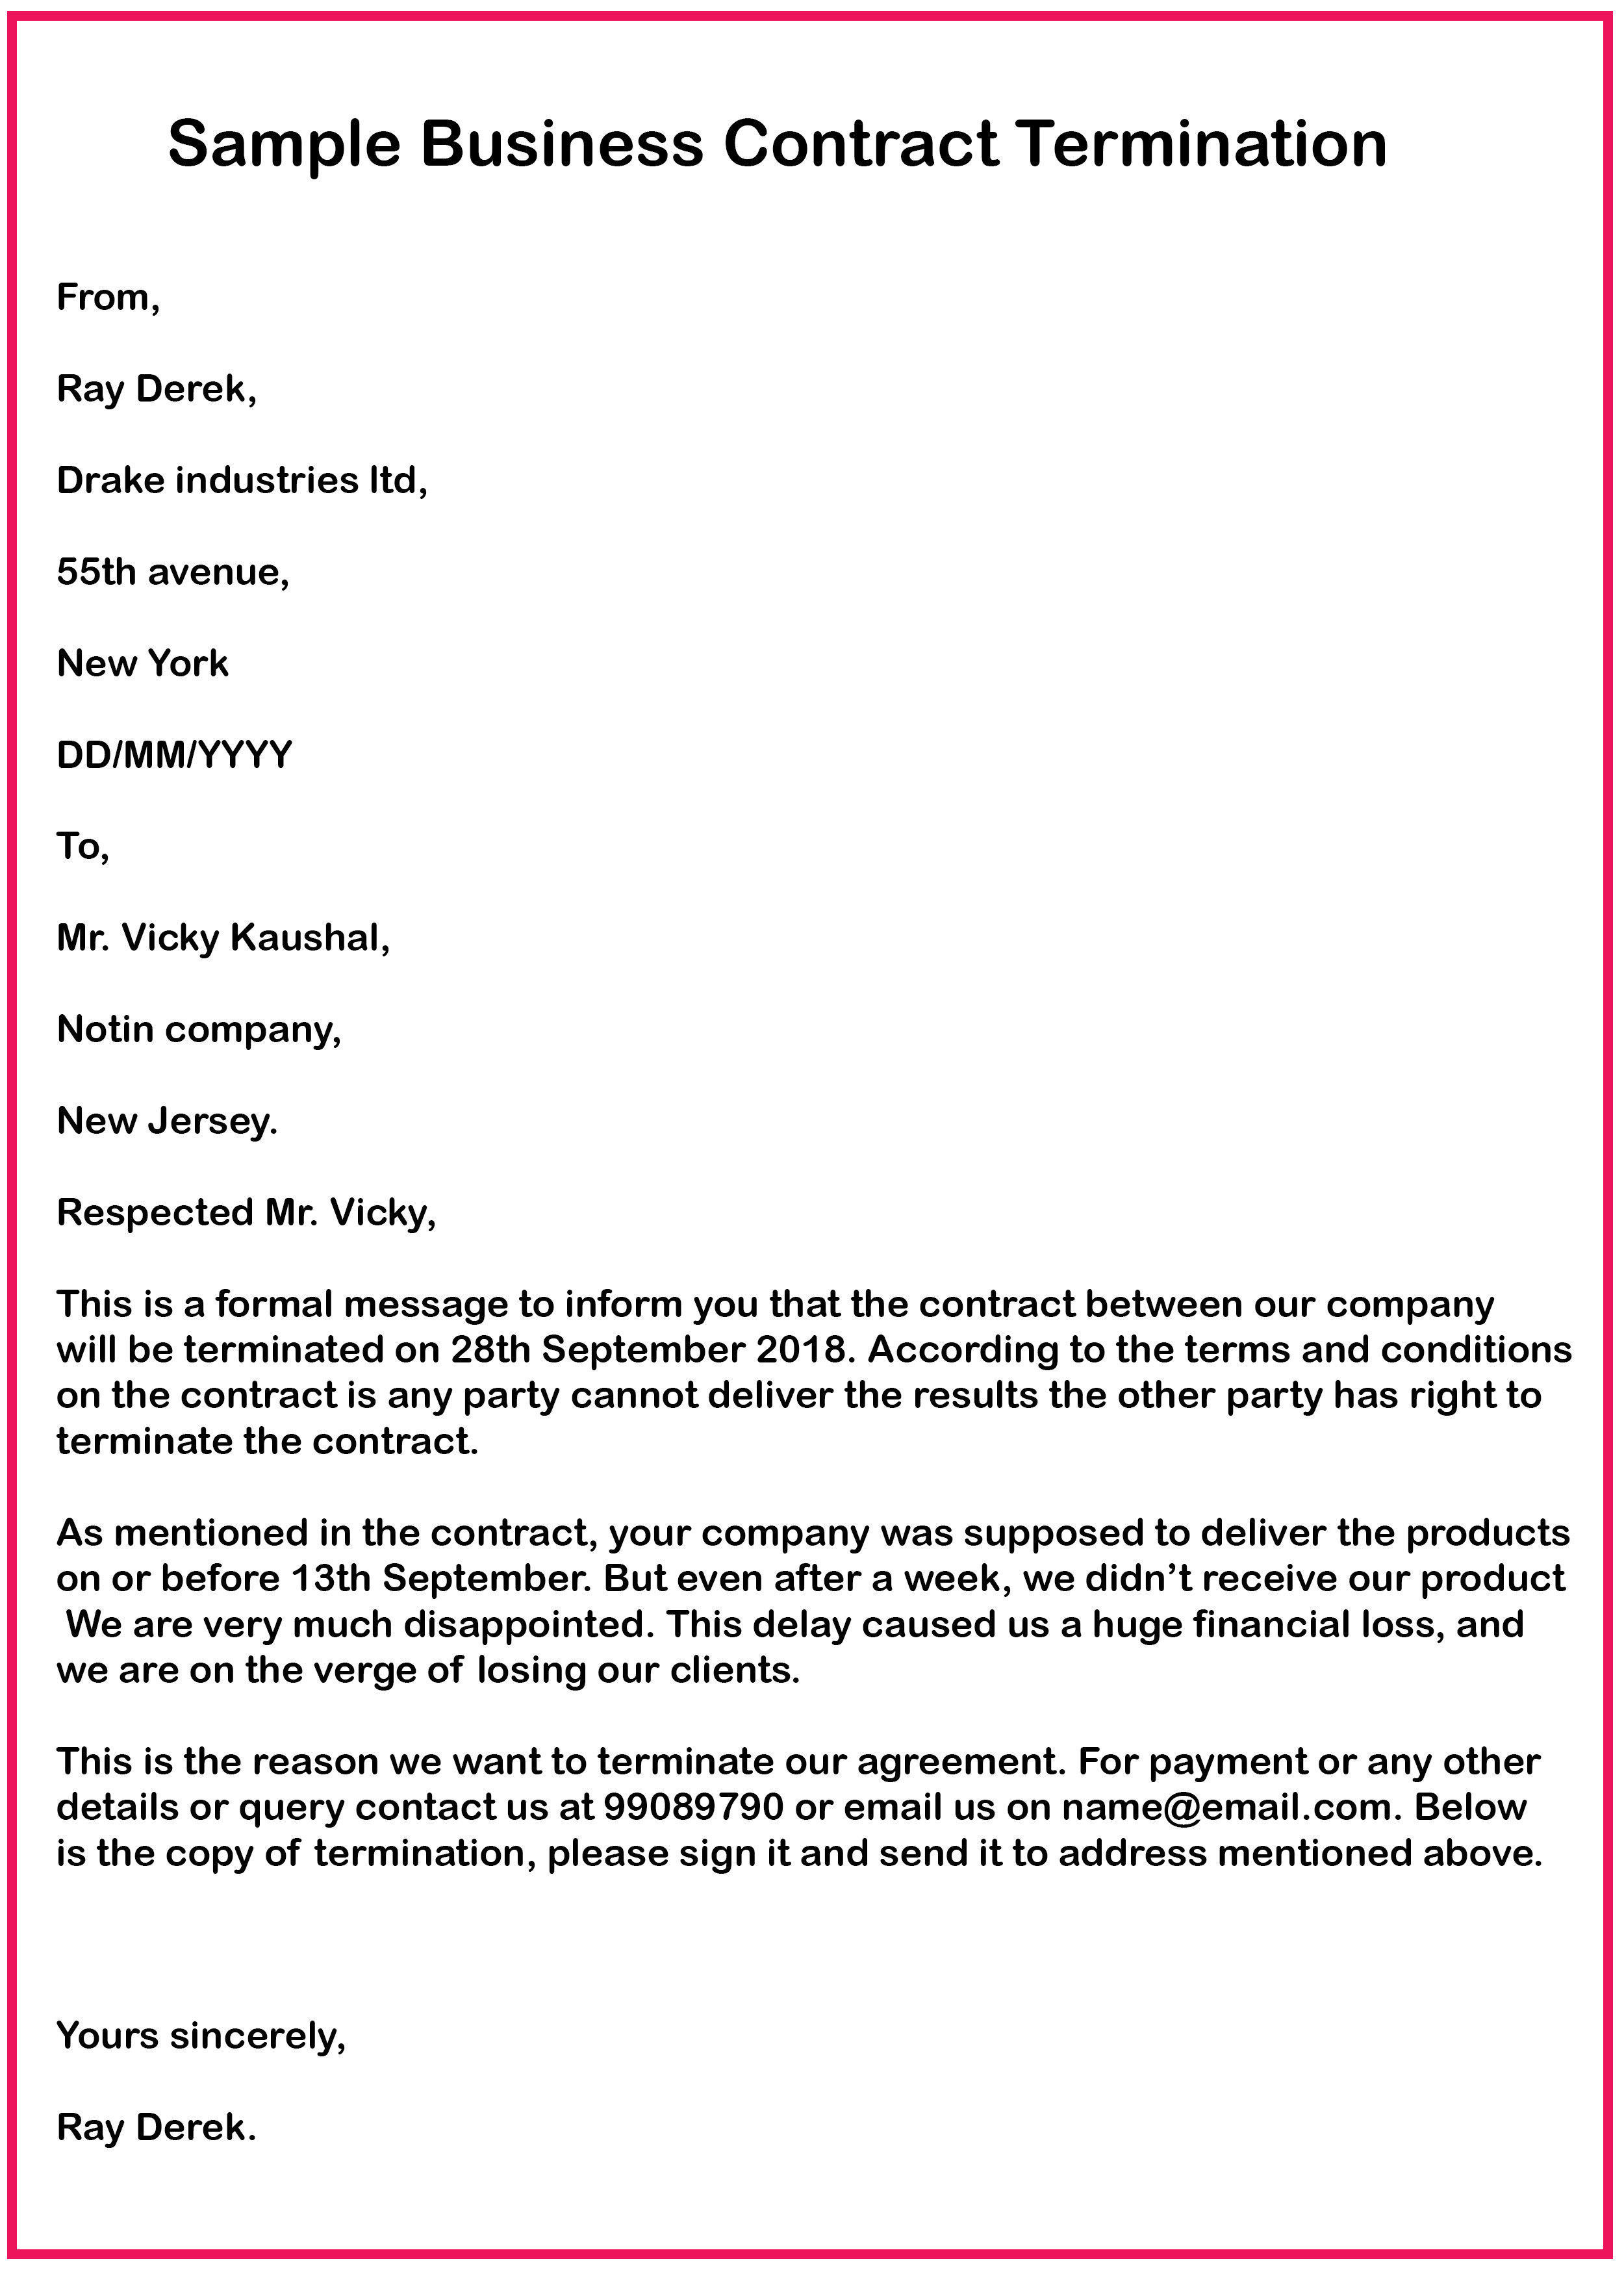 Business Contract Termination Letter 7 Business Contract Termination Letter Samples